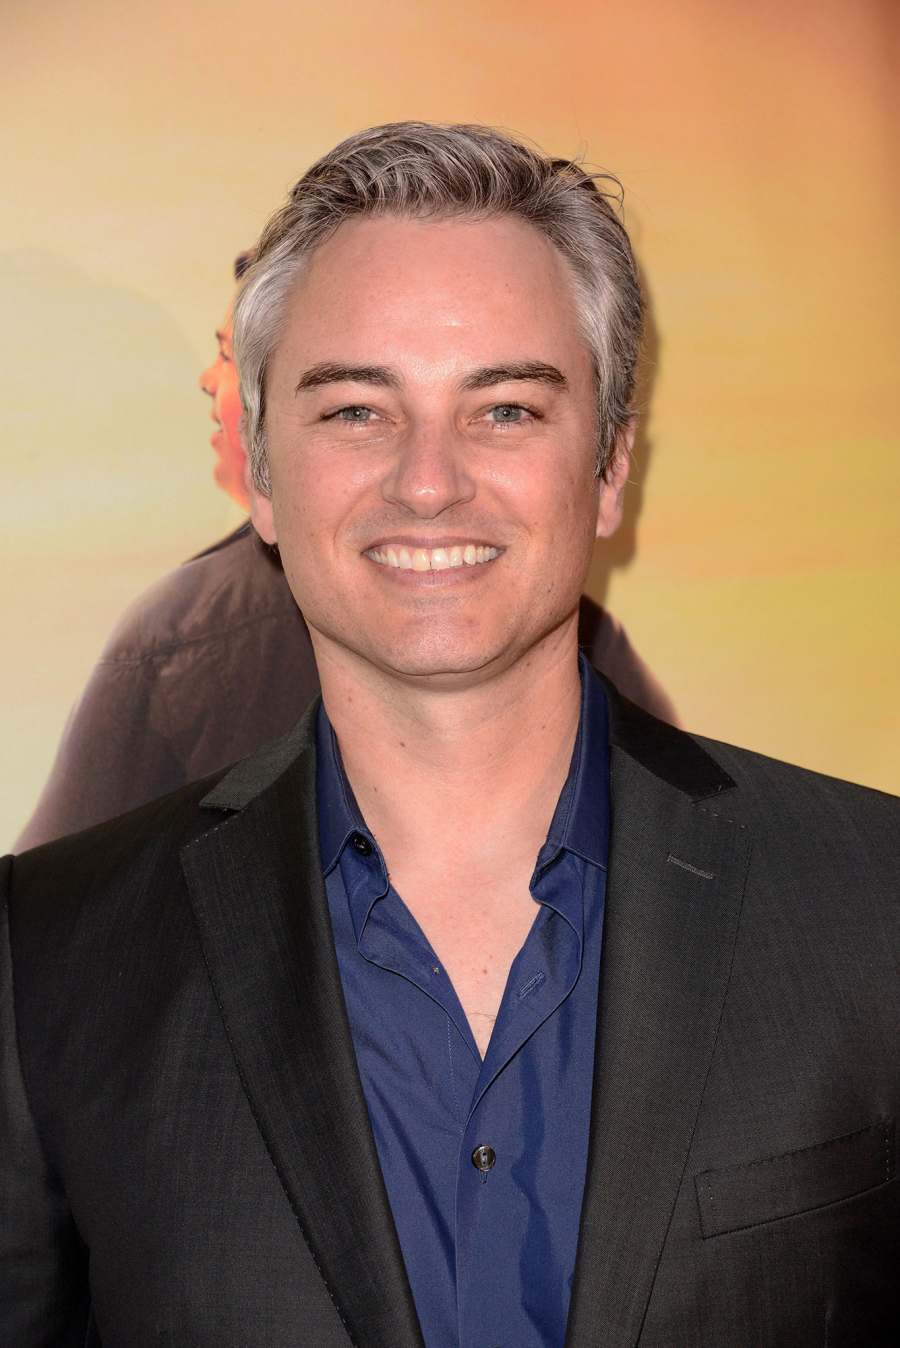 A New Principal Kerr Smith Riverdale Season 4 Everything We Know